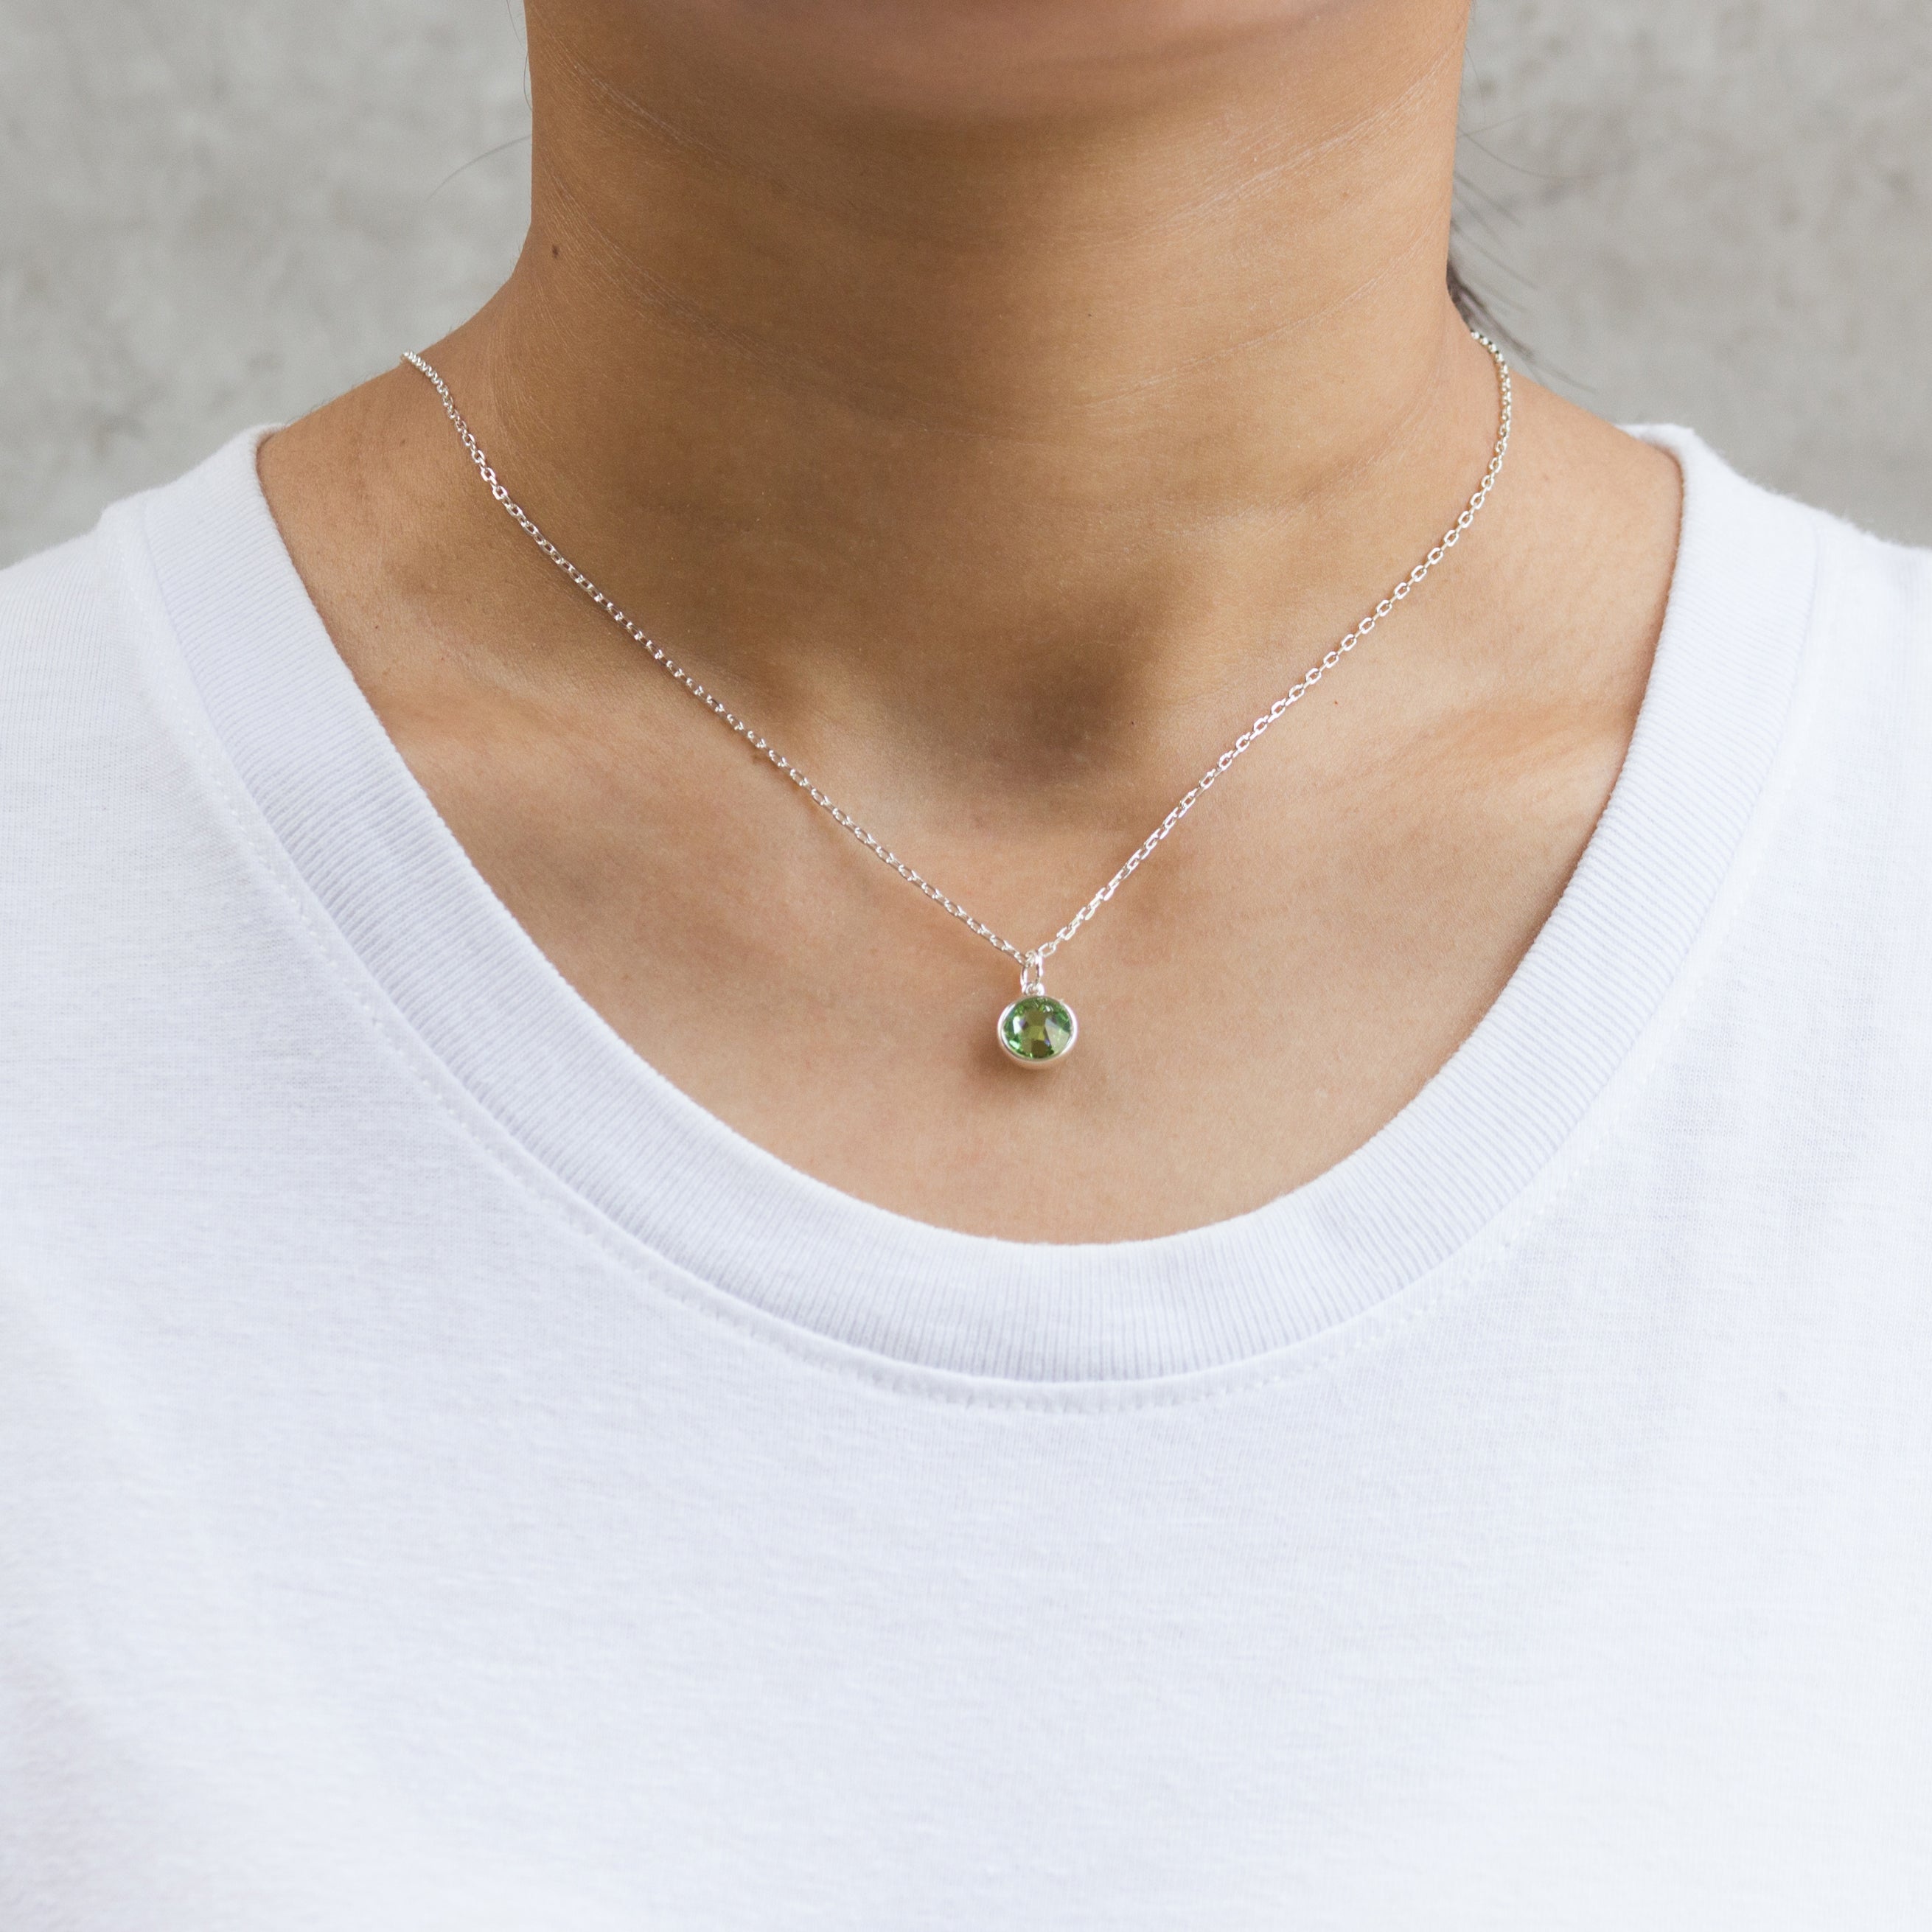 August (Peridot) Birthstone Necklace & Drop Earrings Set Created with Zircondia® Crystals